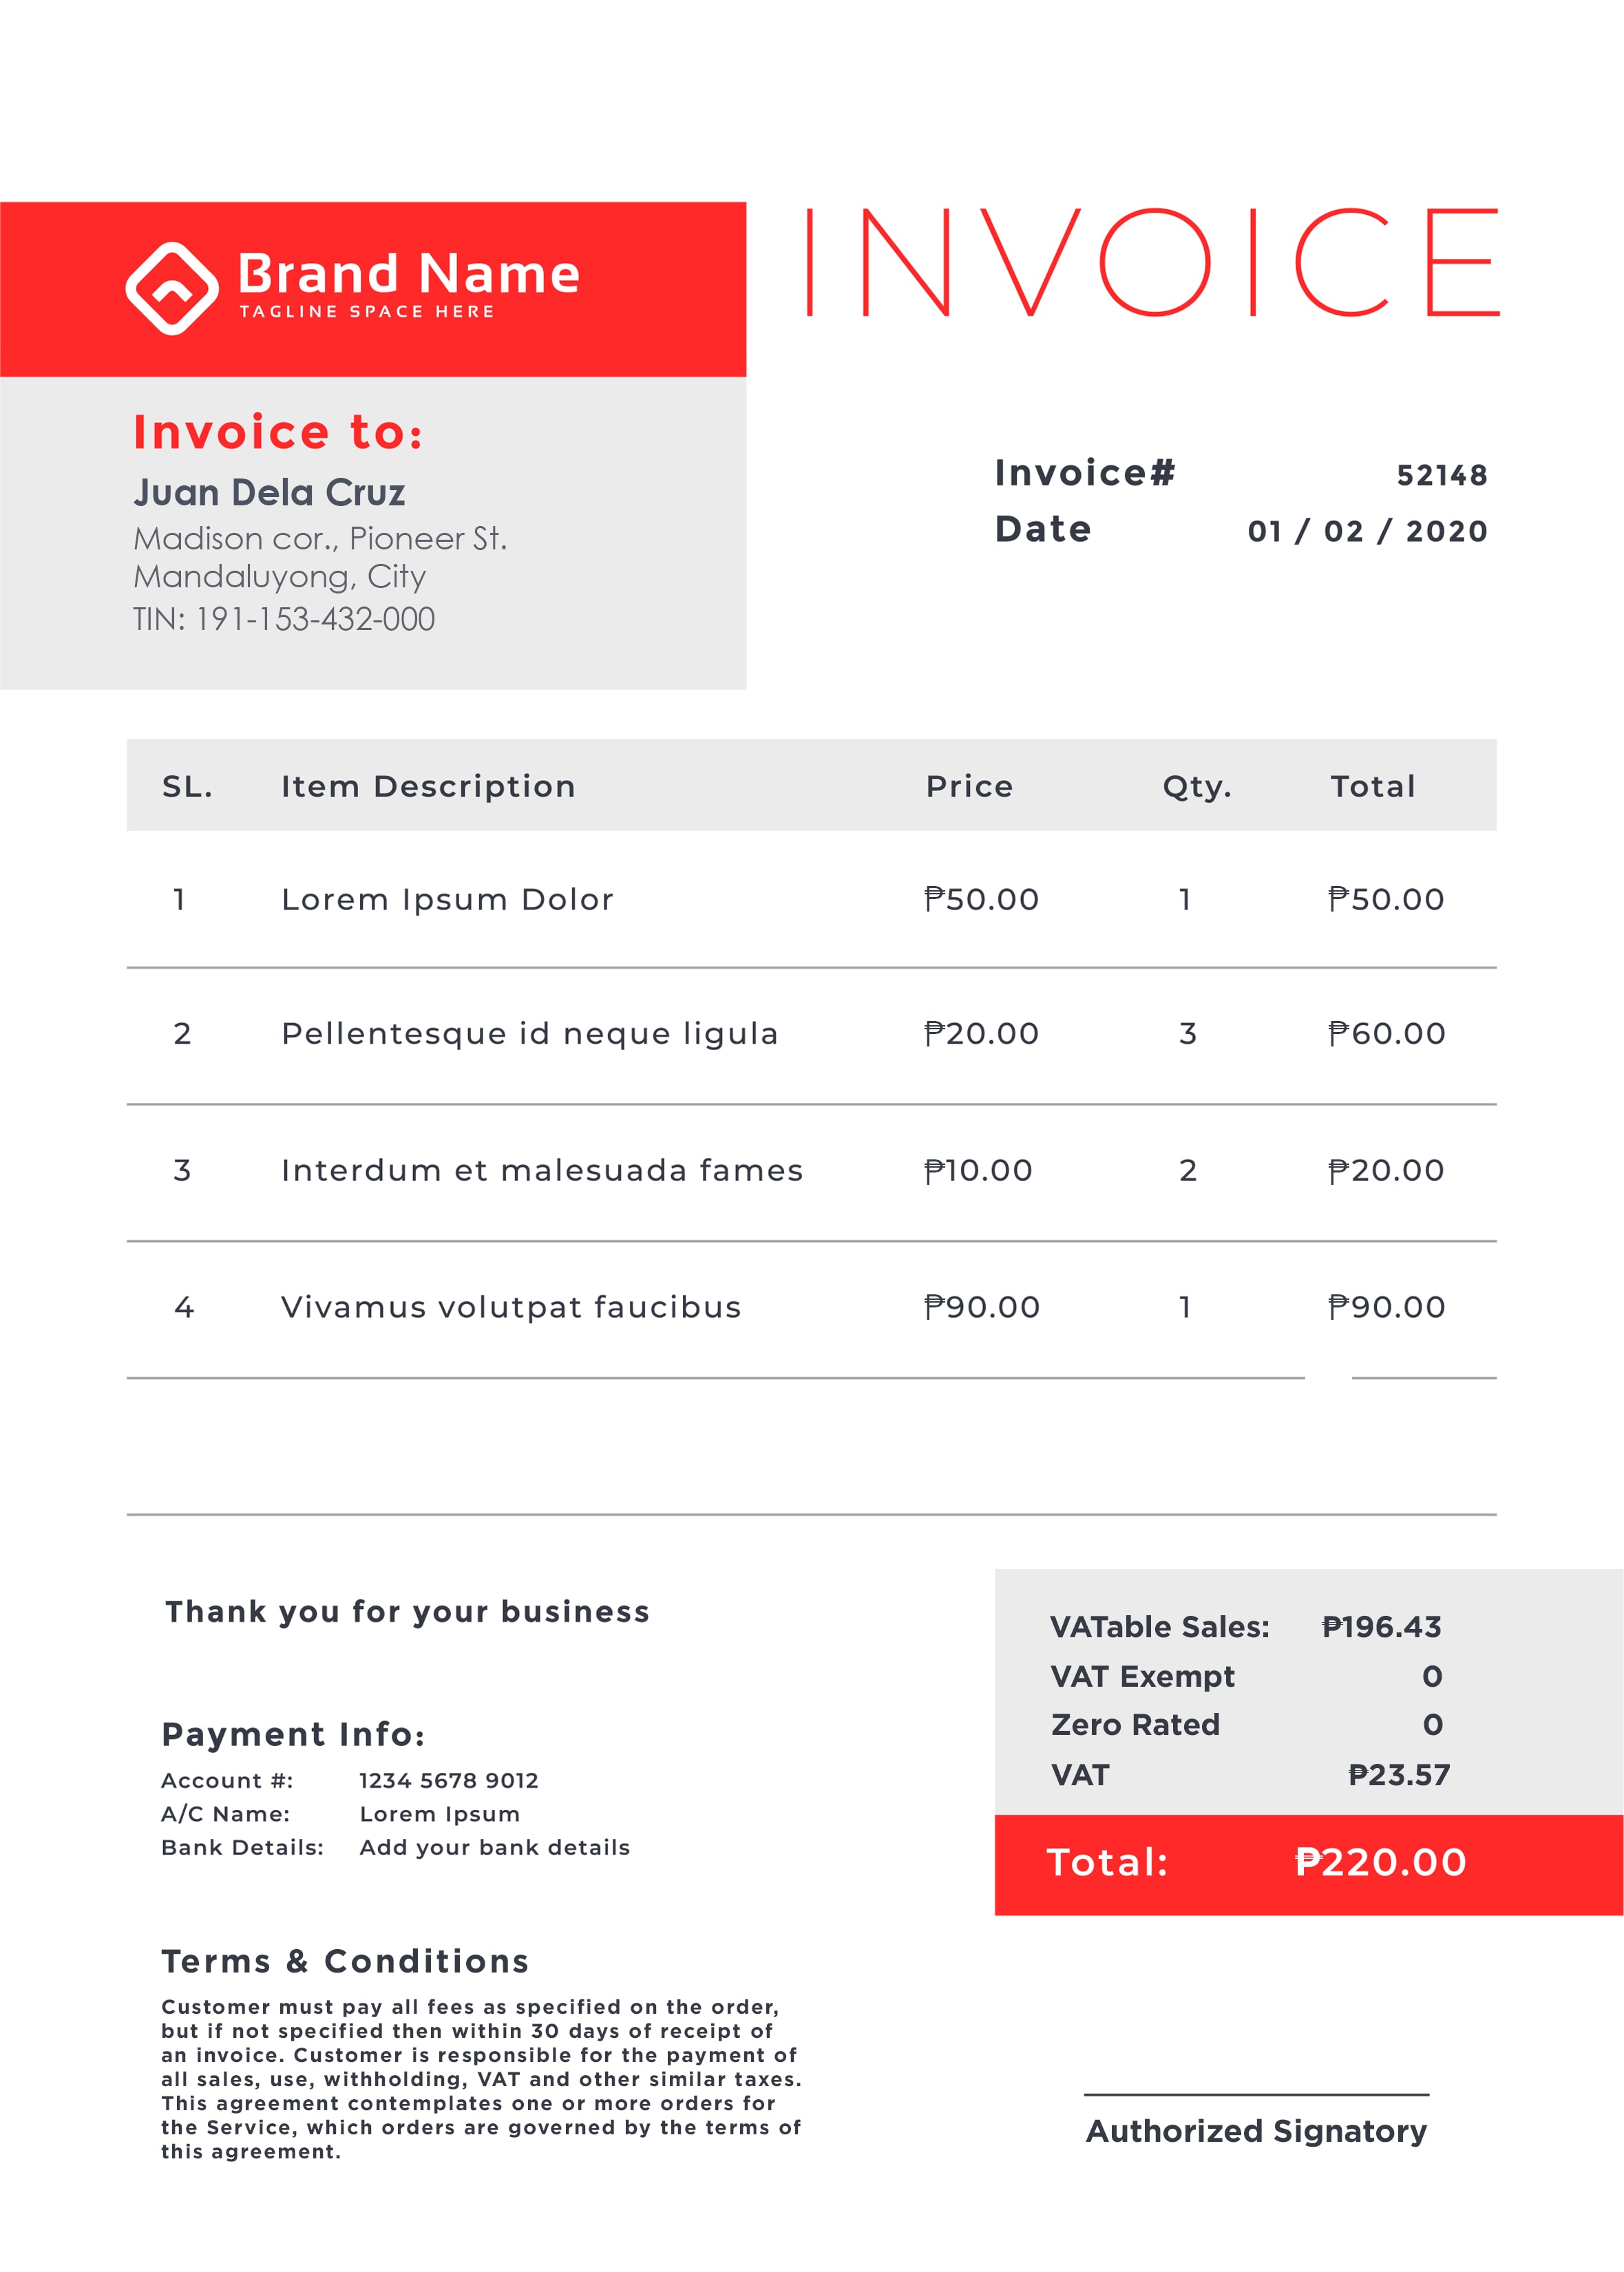 best practices in preparing a sales invoice in the philippines hilsoft